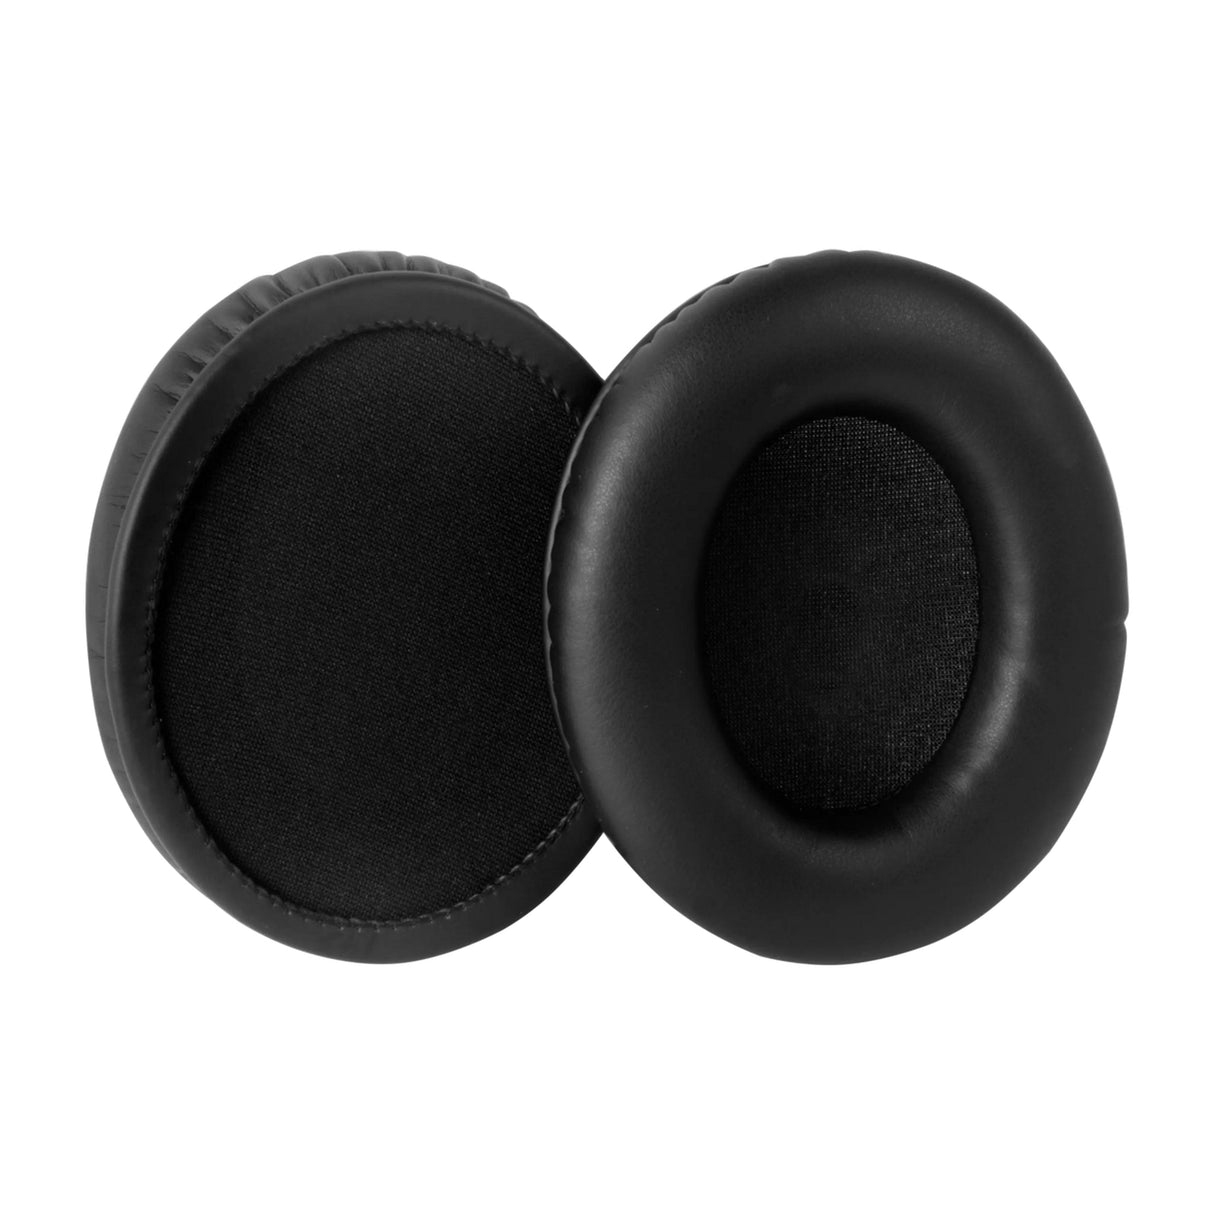 Shure SRH440A-PADS Replacement Earpads for SRH440A, Pair